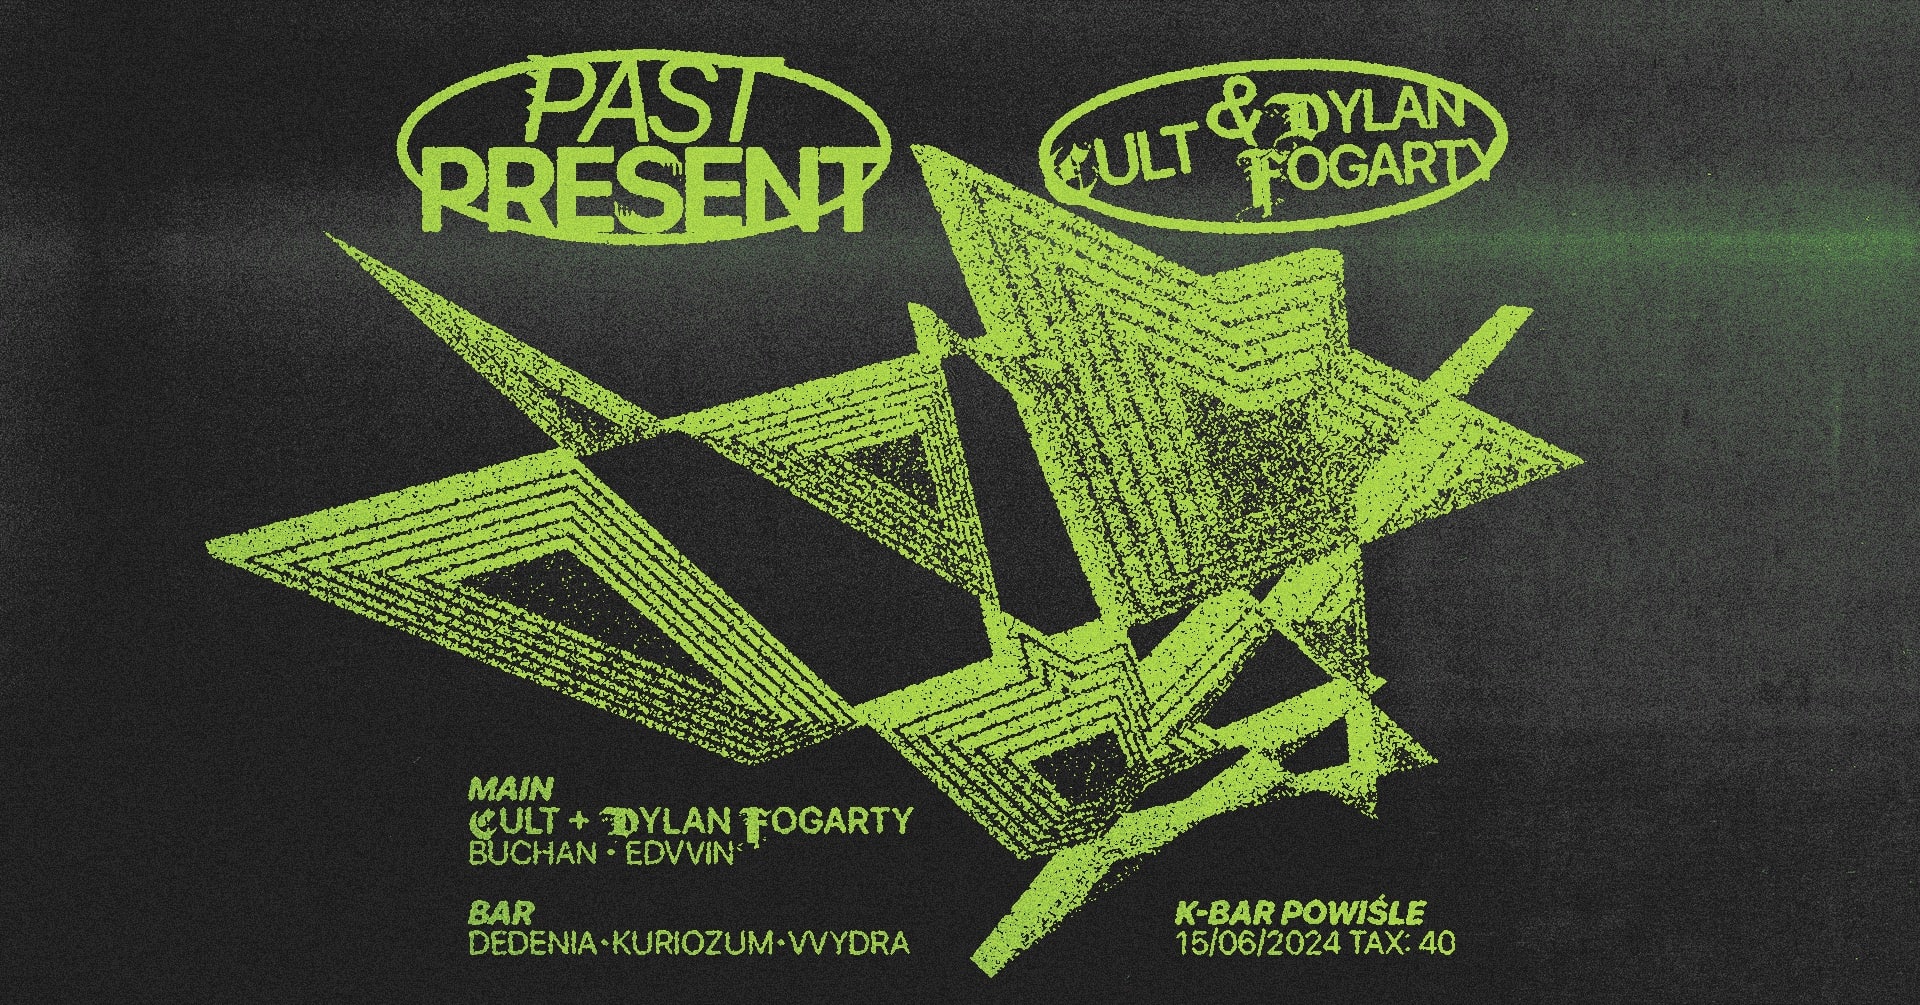 PAST PRESENT: CULT & DYLAN FOGARTY